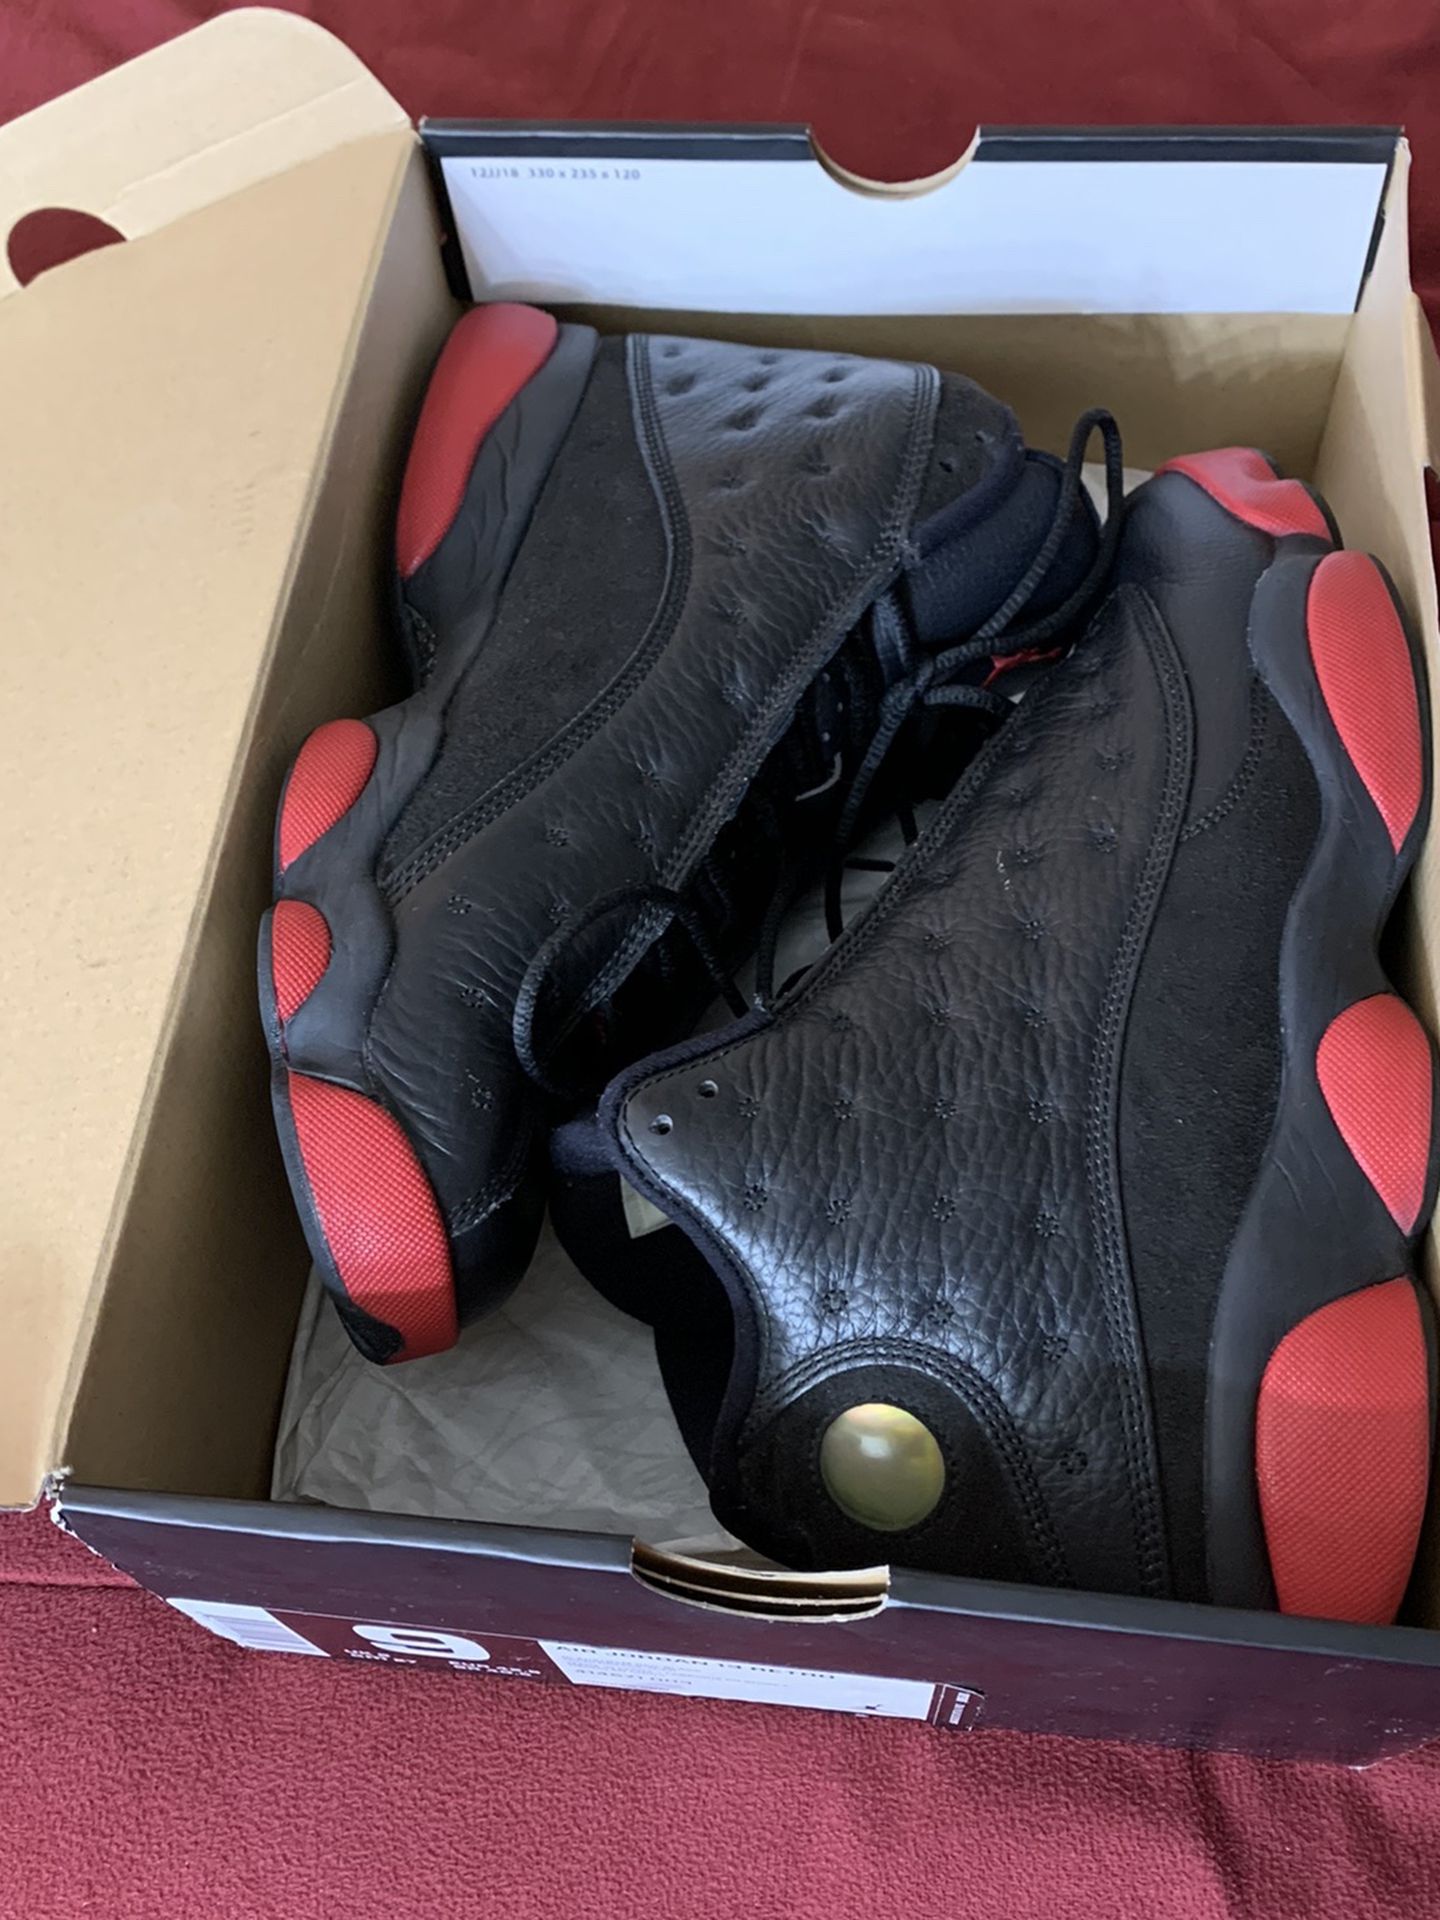 Dirty Bred 13